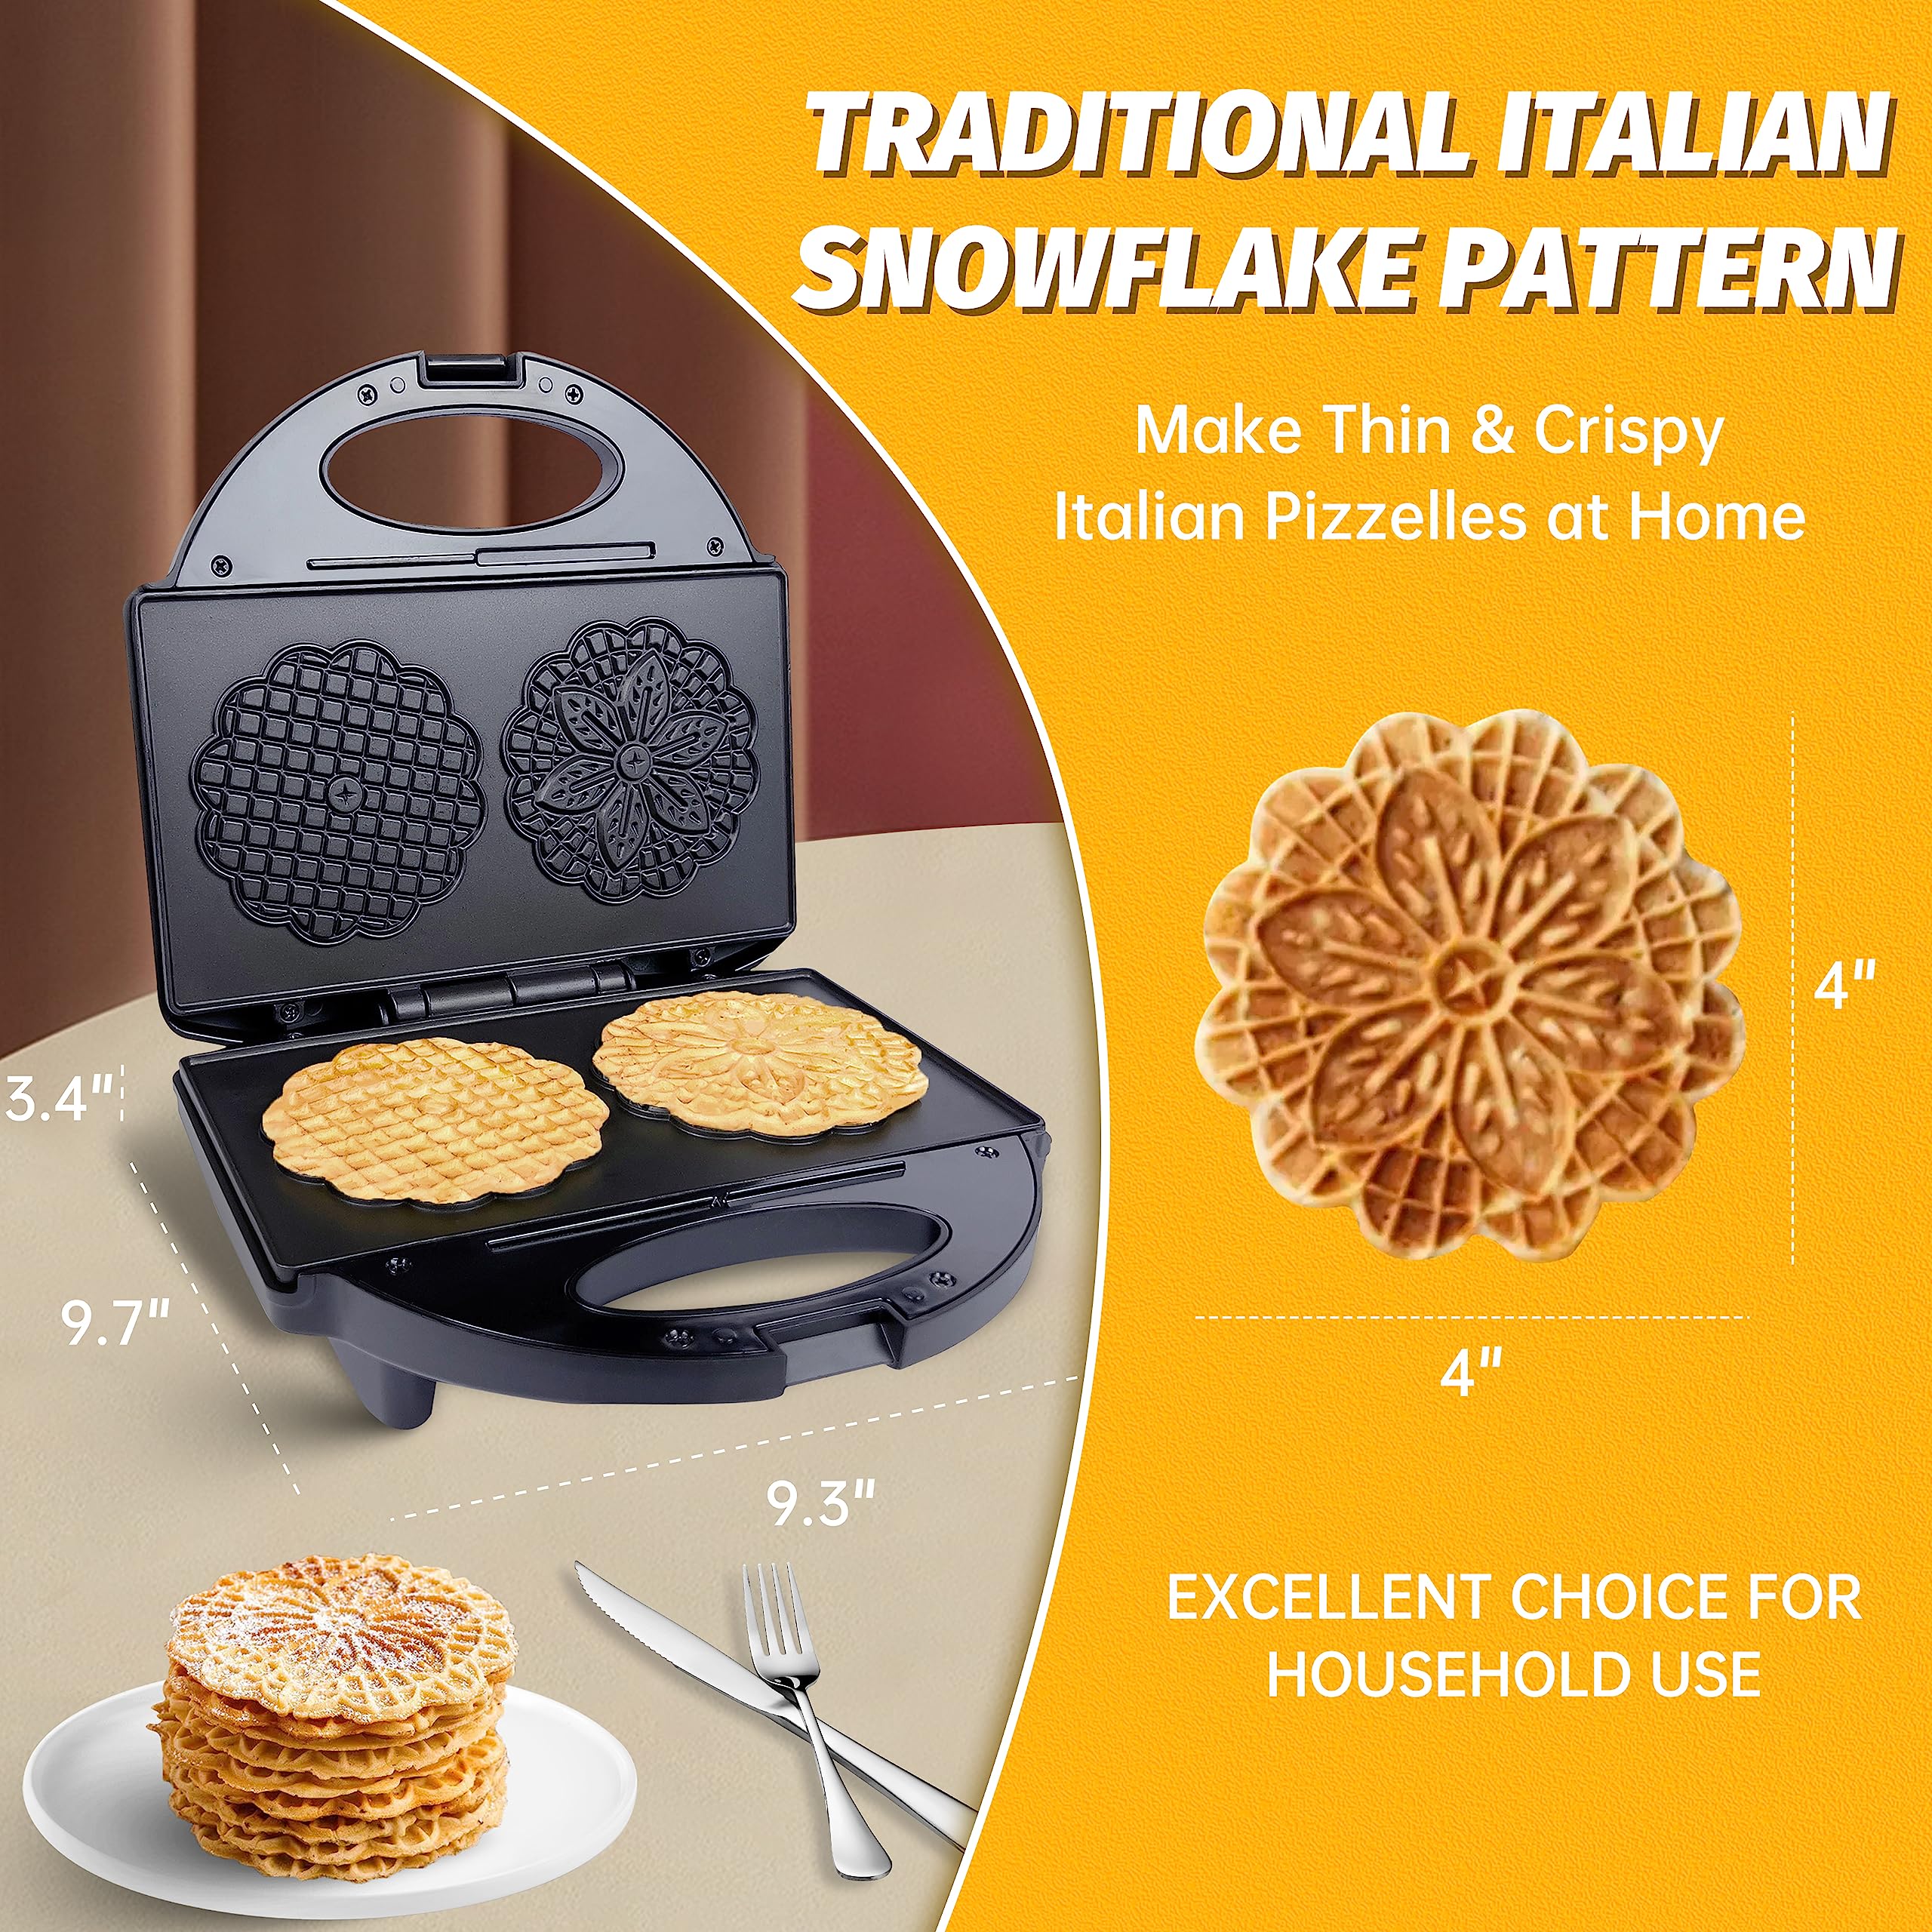 FineMade Pizzelle Maker with Non-Stick Coating, Electric Pizzelle Cookie Baker Press with Snowflake Pattern, Make Two 4 Inch Traditional Italian Waffle Cookies at Once, Recipe Included